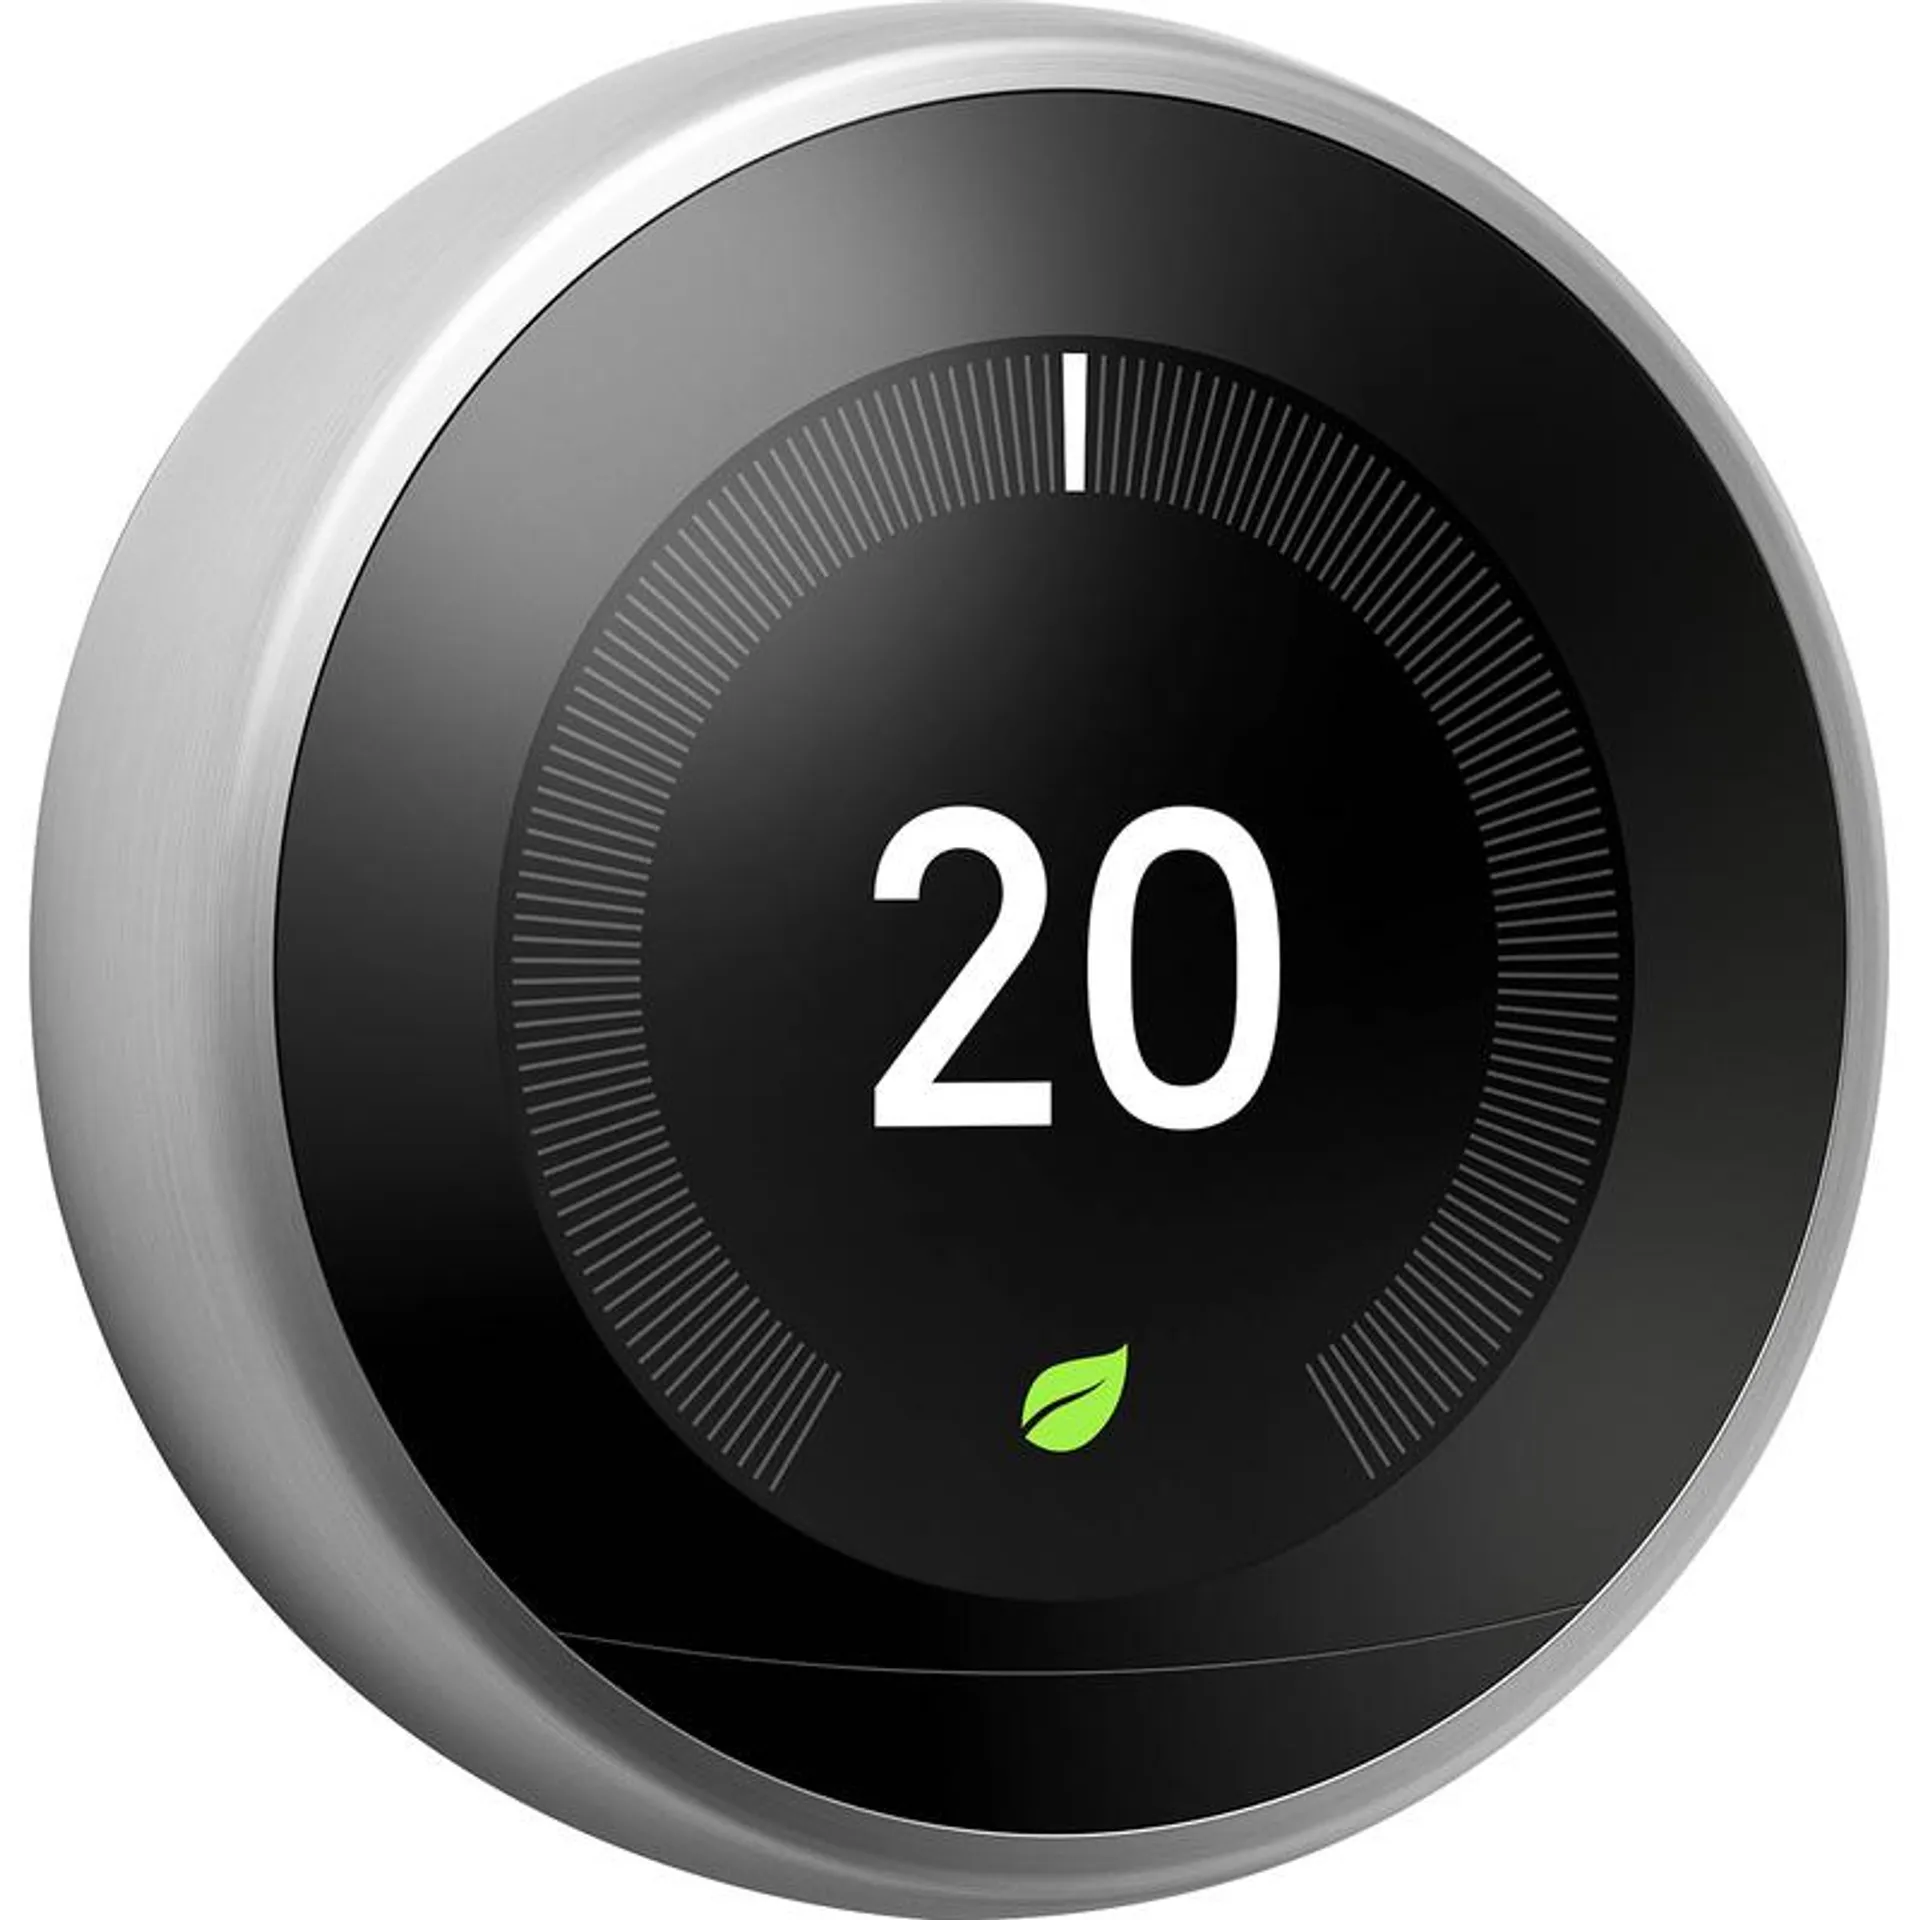 Google Nest Smart Learning Thermostat Pro Edition Stainless HF001631-GB